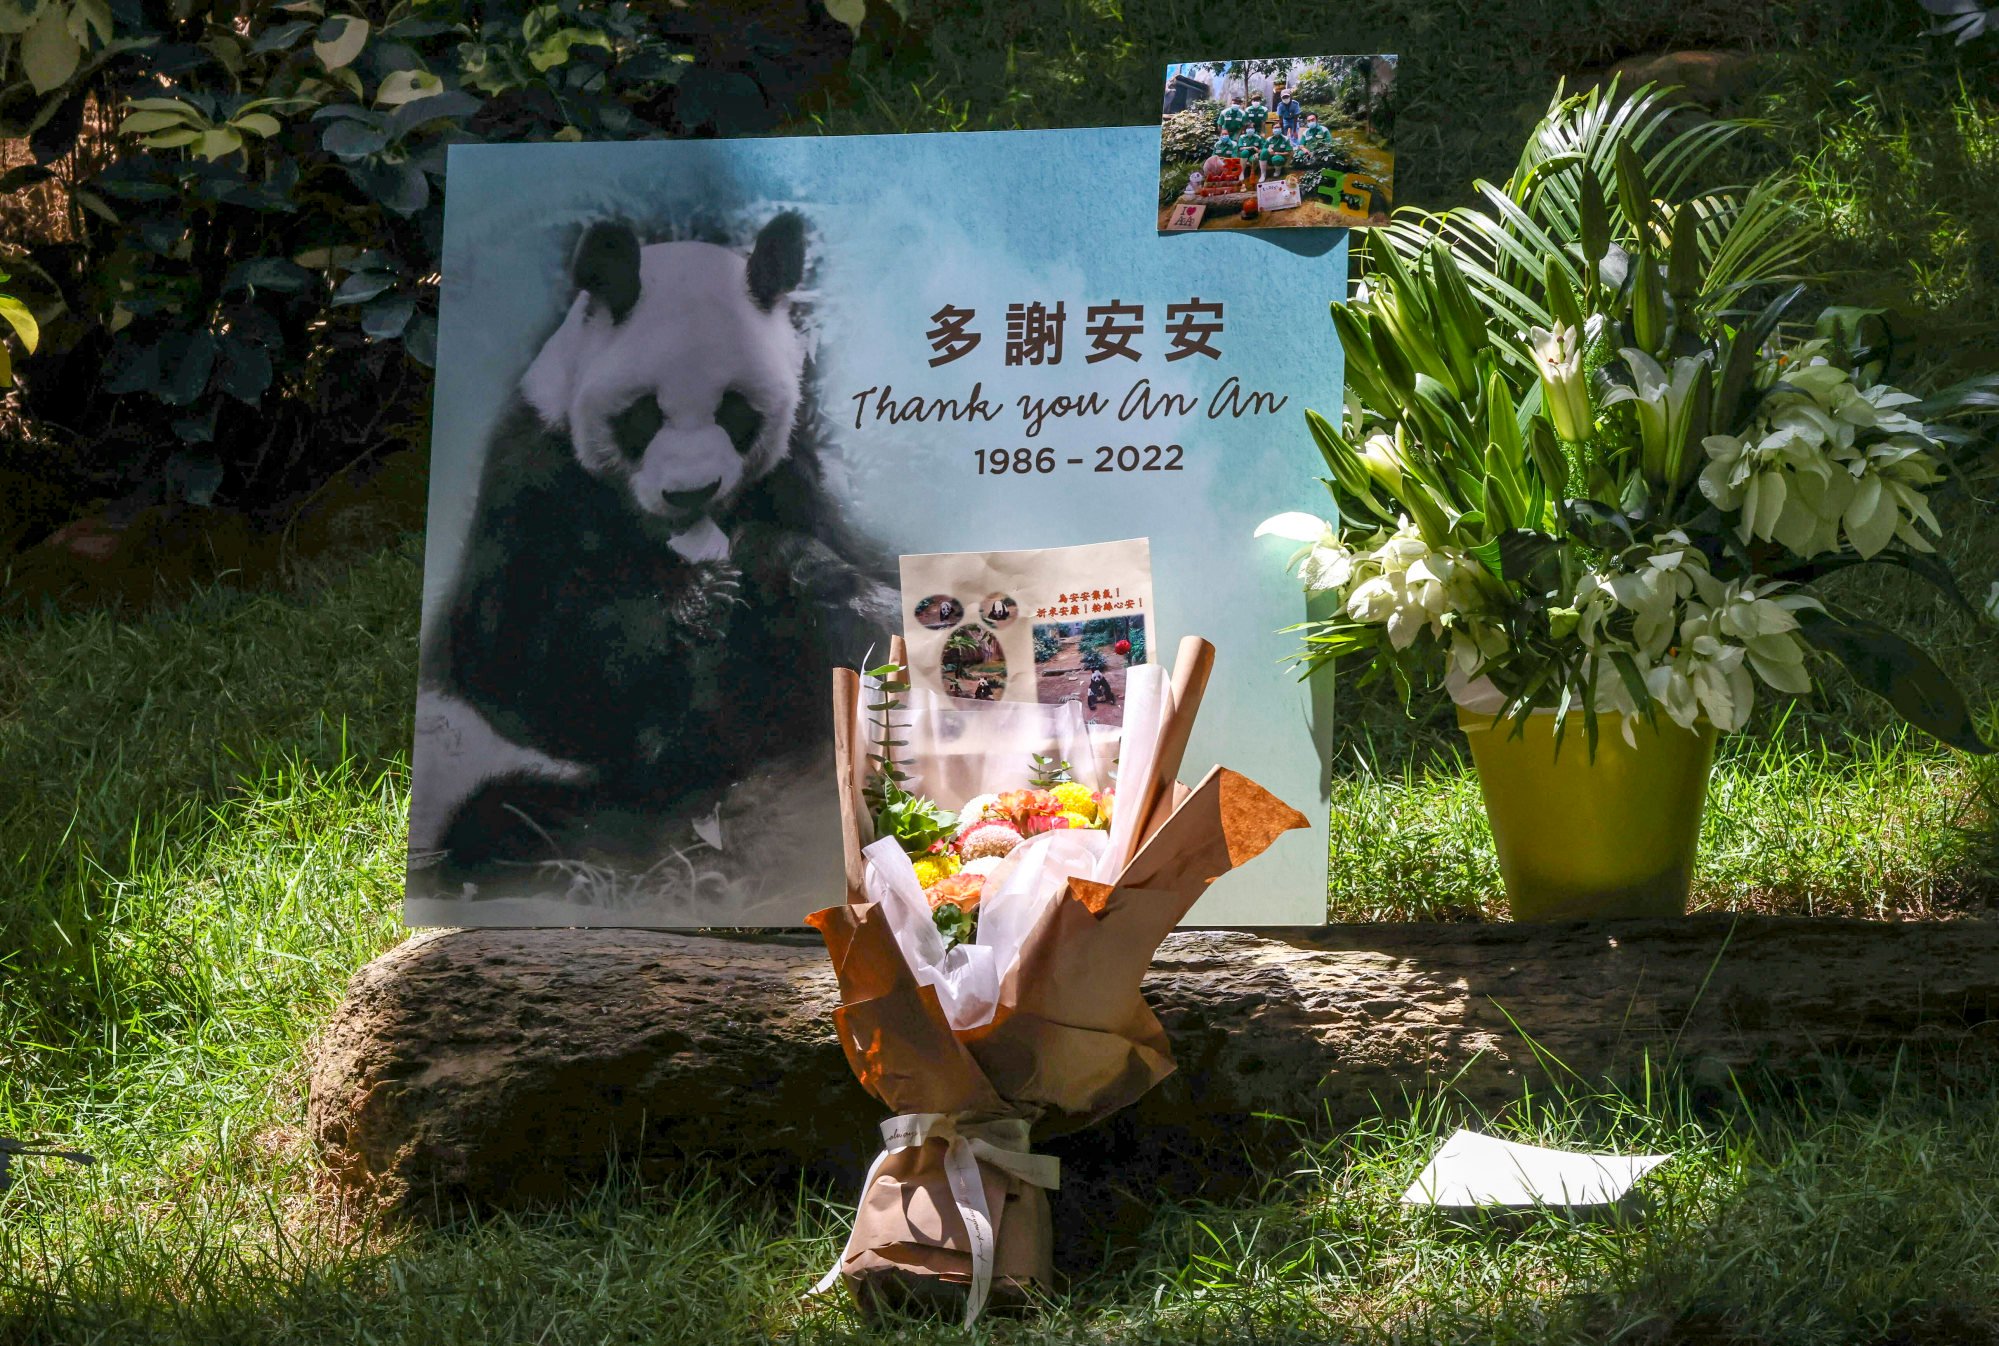 A board erected in the enclosure, in memory of the panda. Photo: K. Y. Cheng